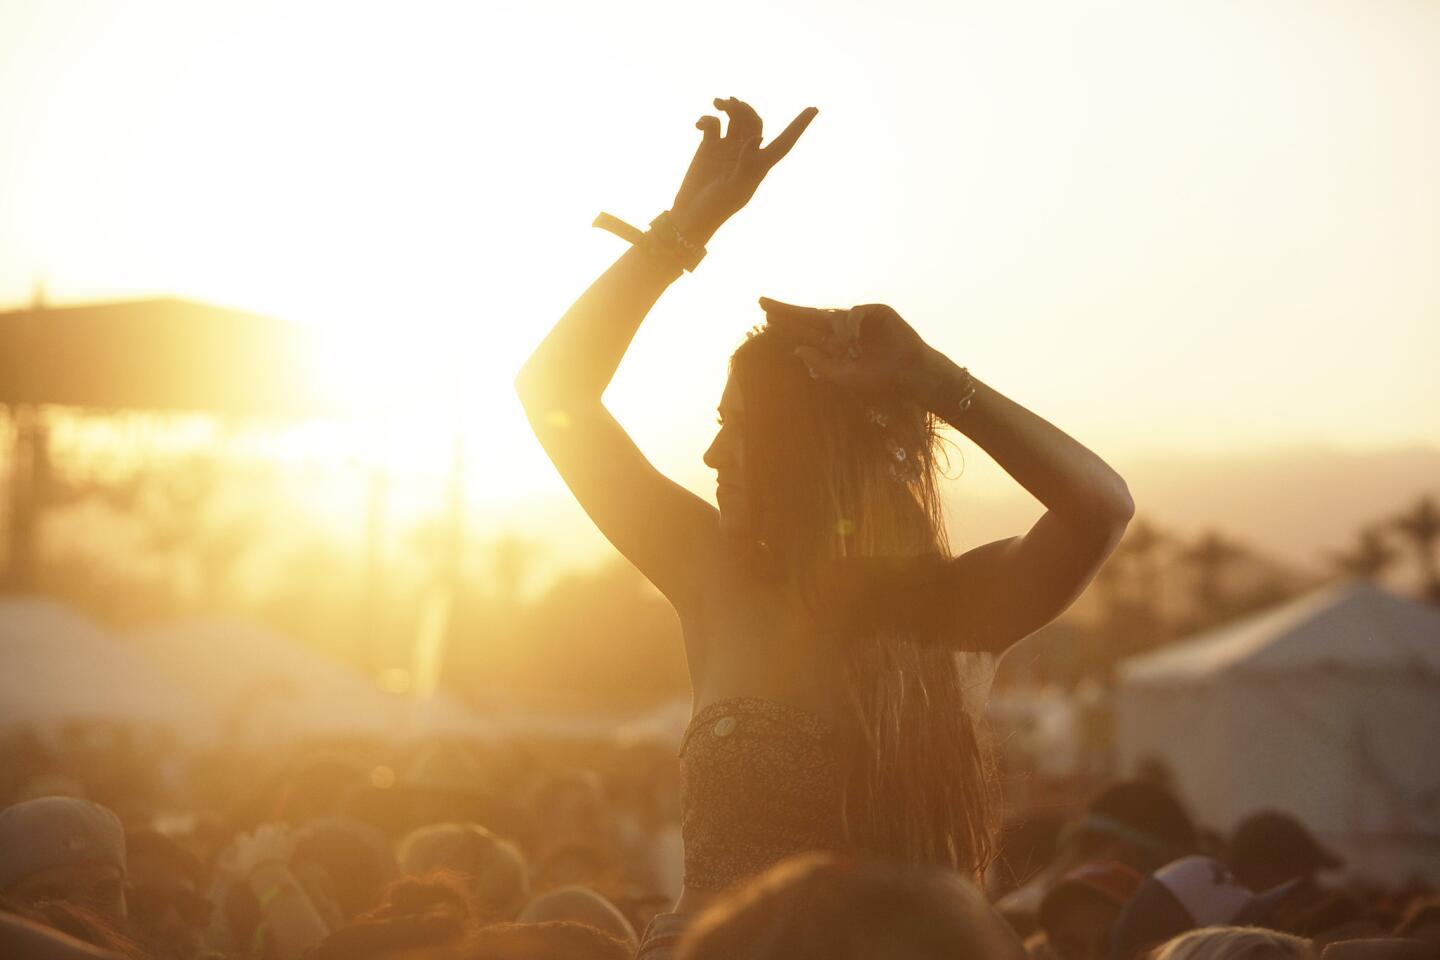 The sun sets on day one of the Coachella Music & Arts Festival.